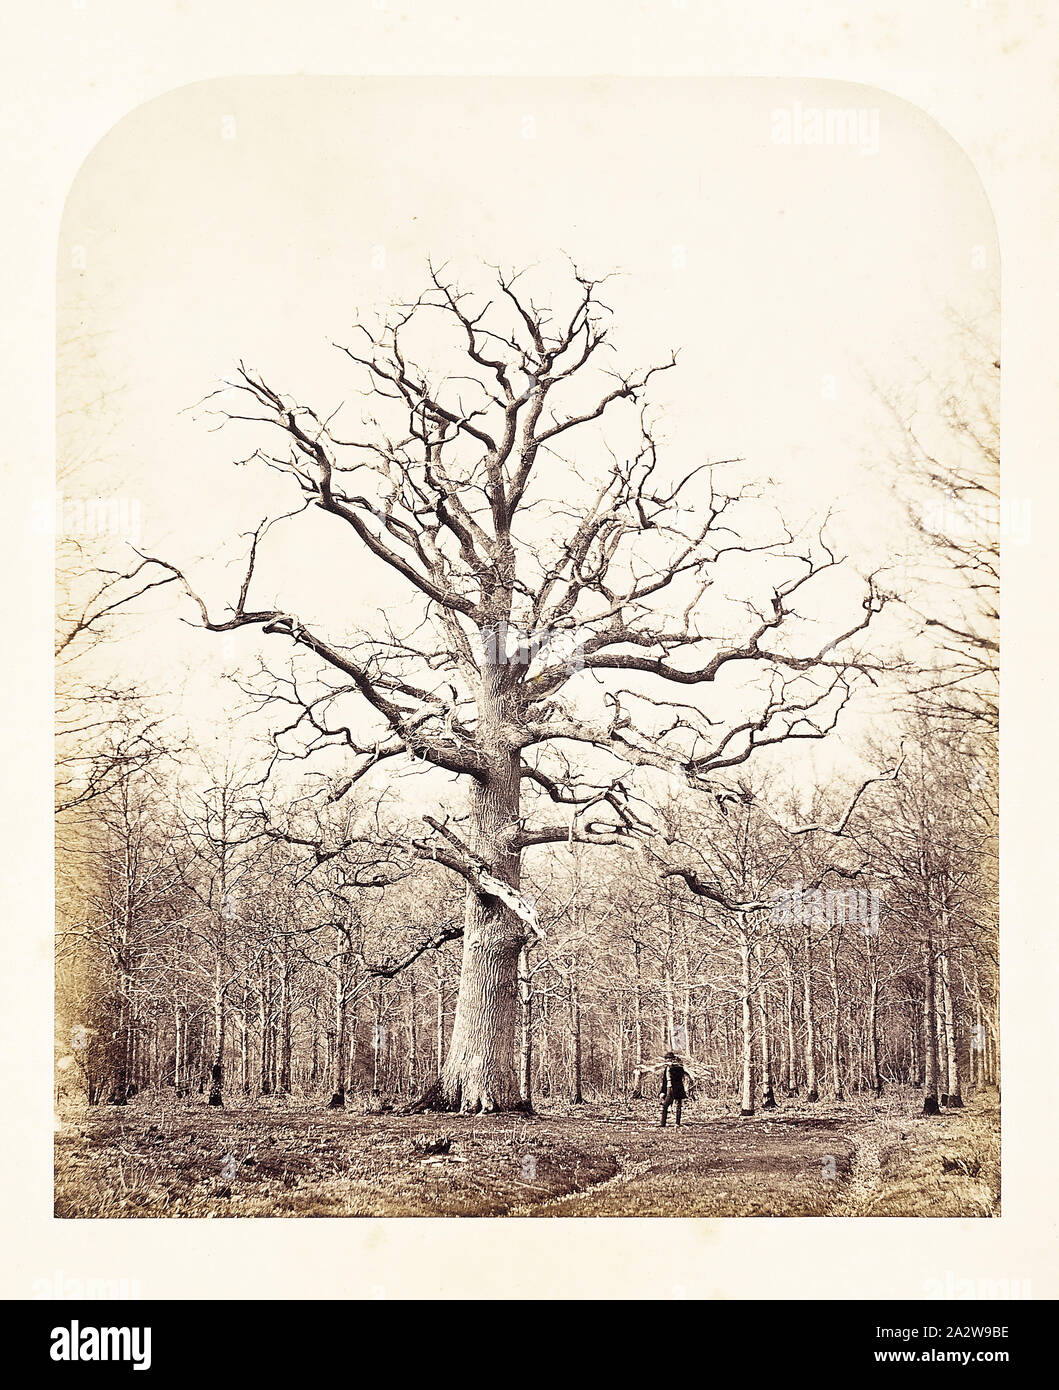 Queen Anne's Oak, James Sinclair (British, 1821-1881), 1864, albumen print, 11-1/4 x 9-3/8 in. (image), series, The History of Windsor Great Park and Windsor Forest Stock Photo